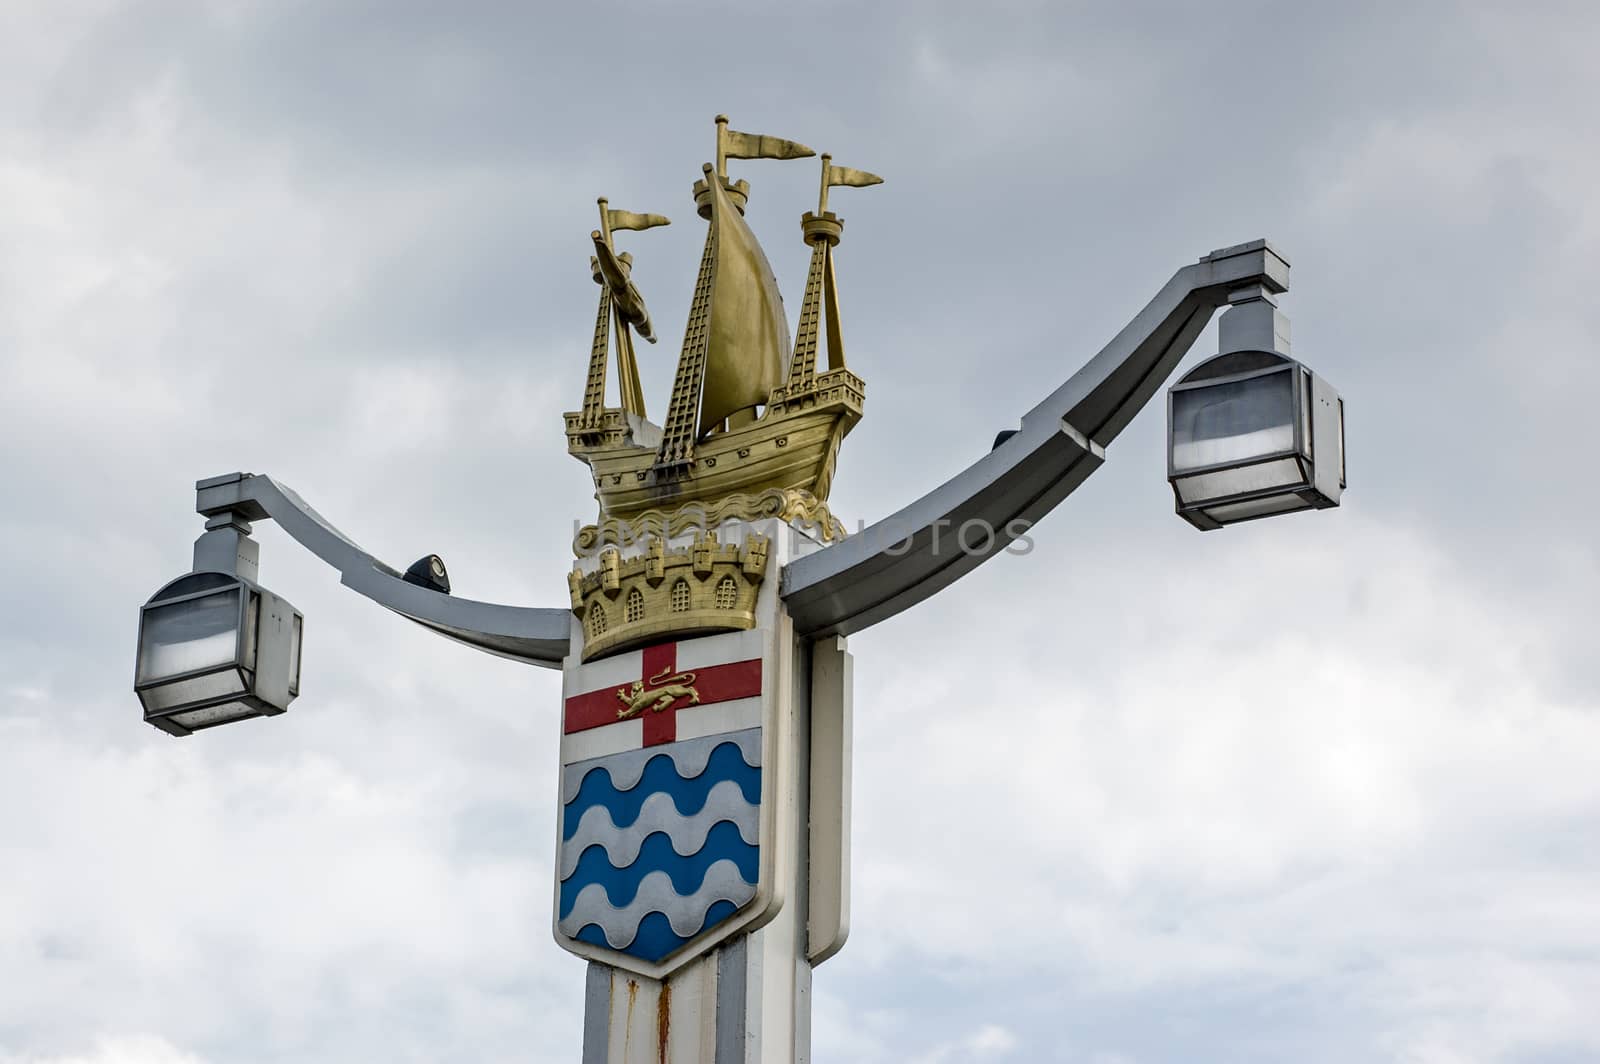 One of the four art deco style lamp posts at the entrances to Chelsea Bridge, London. A golden galleon ship sits on top of the old London County Council coat of arms. Public display since 1937.